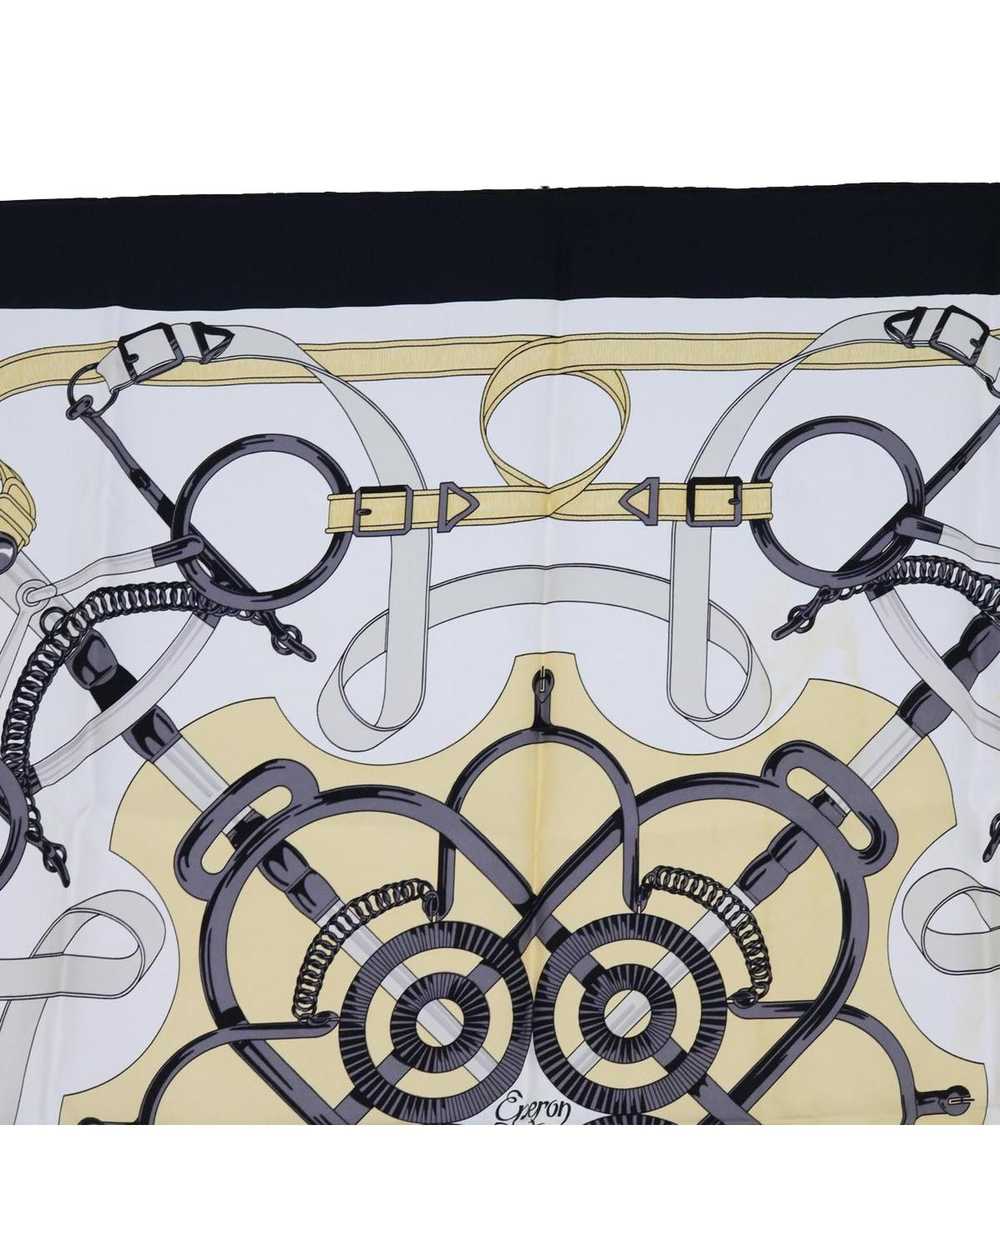 Hermes Silk Eperon dOr Scarf with Horse Motif - image 3